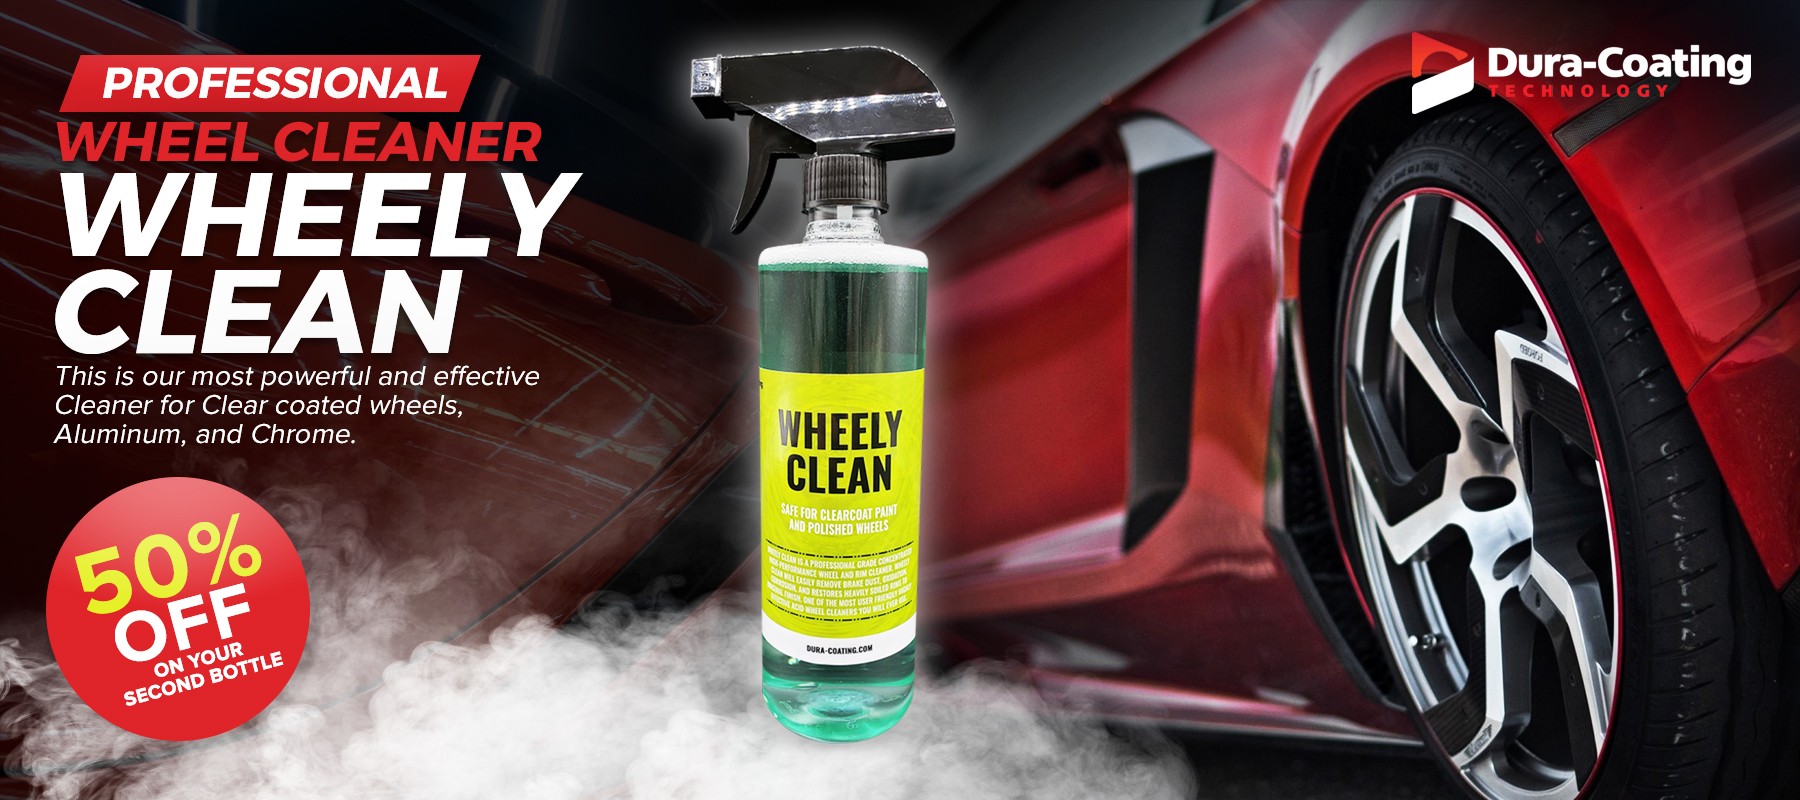 Dura-Coating Wheely Clean - Professional Wheel Cleaner | Highly Effective  for Chrome, Aluminum, and Clear-Coated Wheels | 16 oz Ready-to-Use Wheel  and